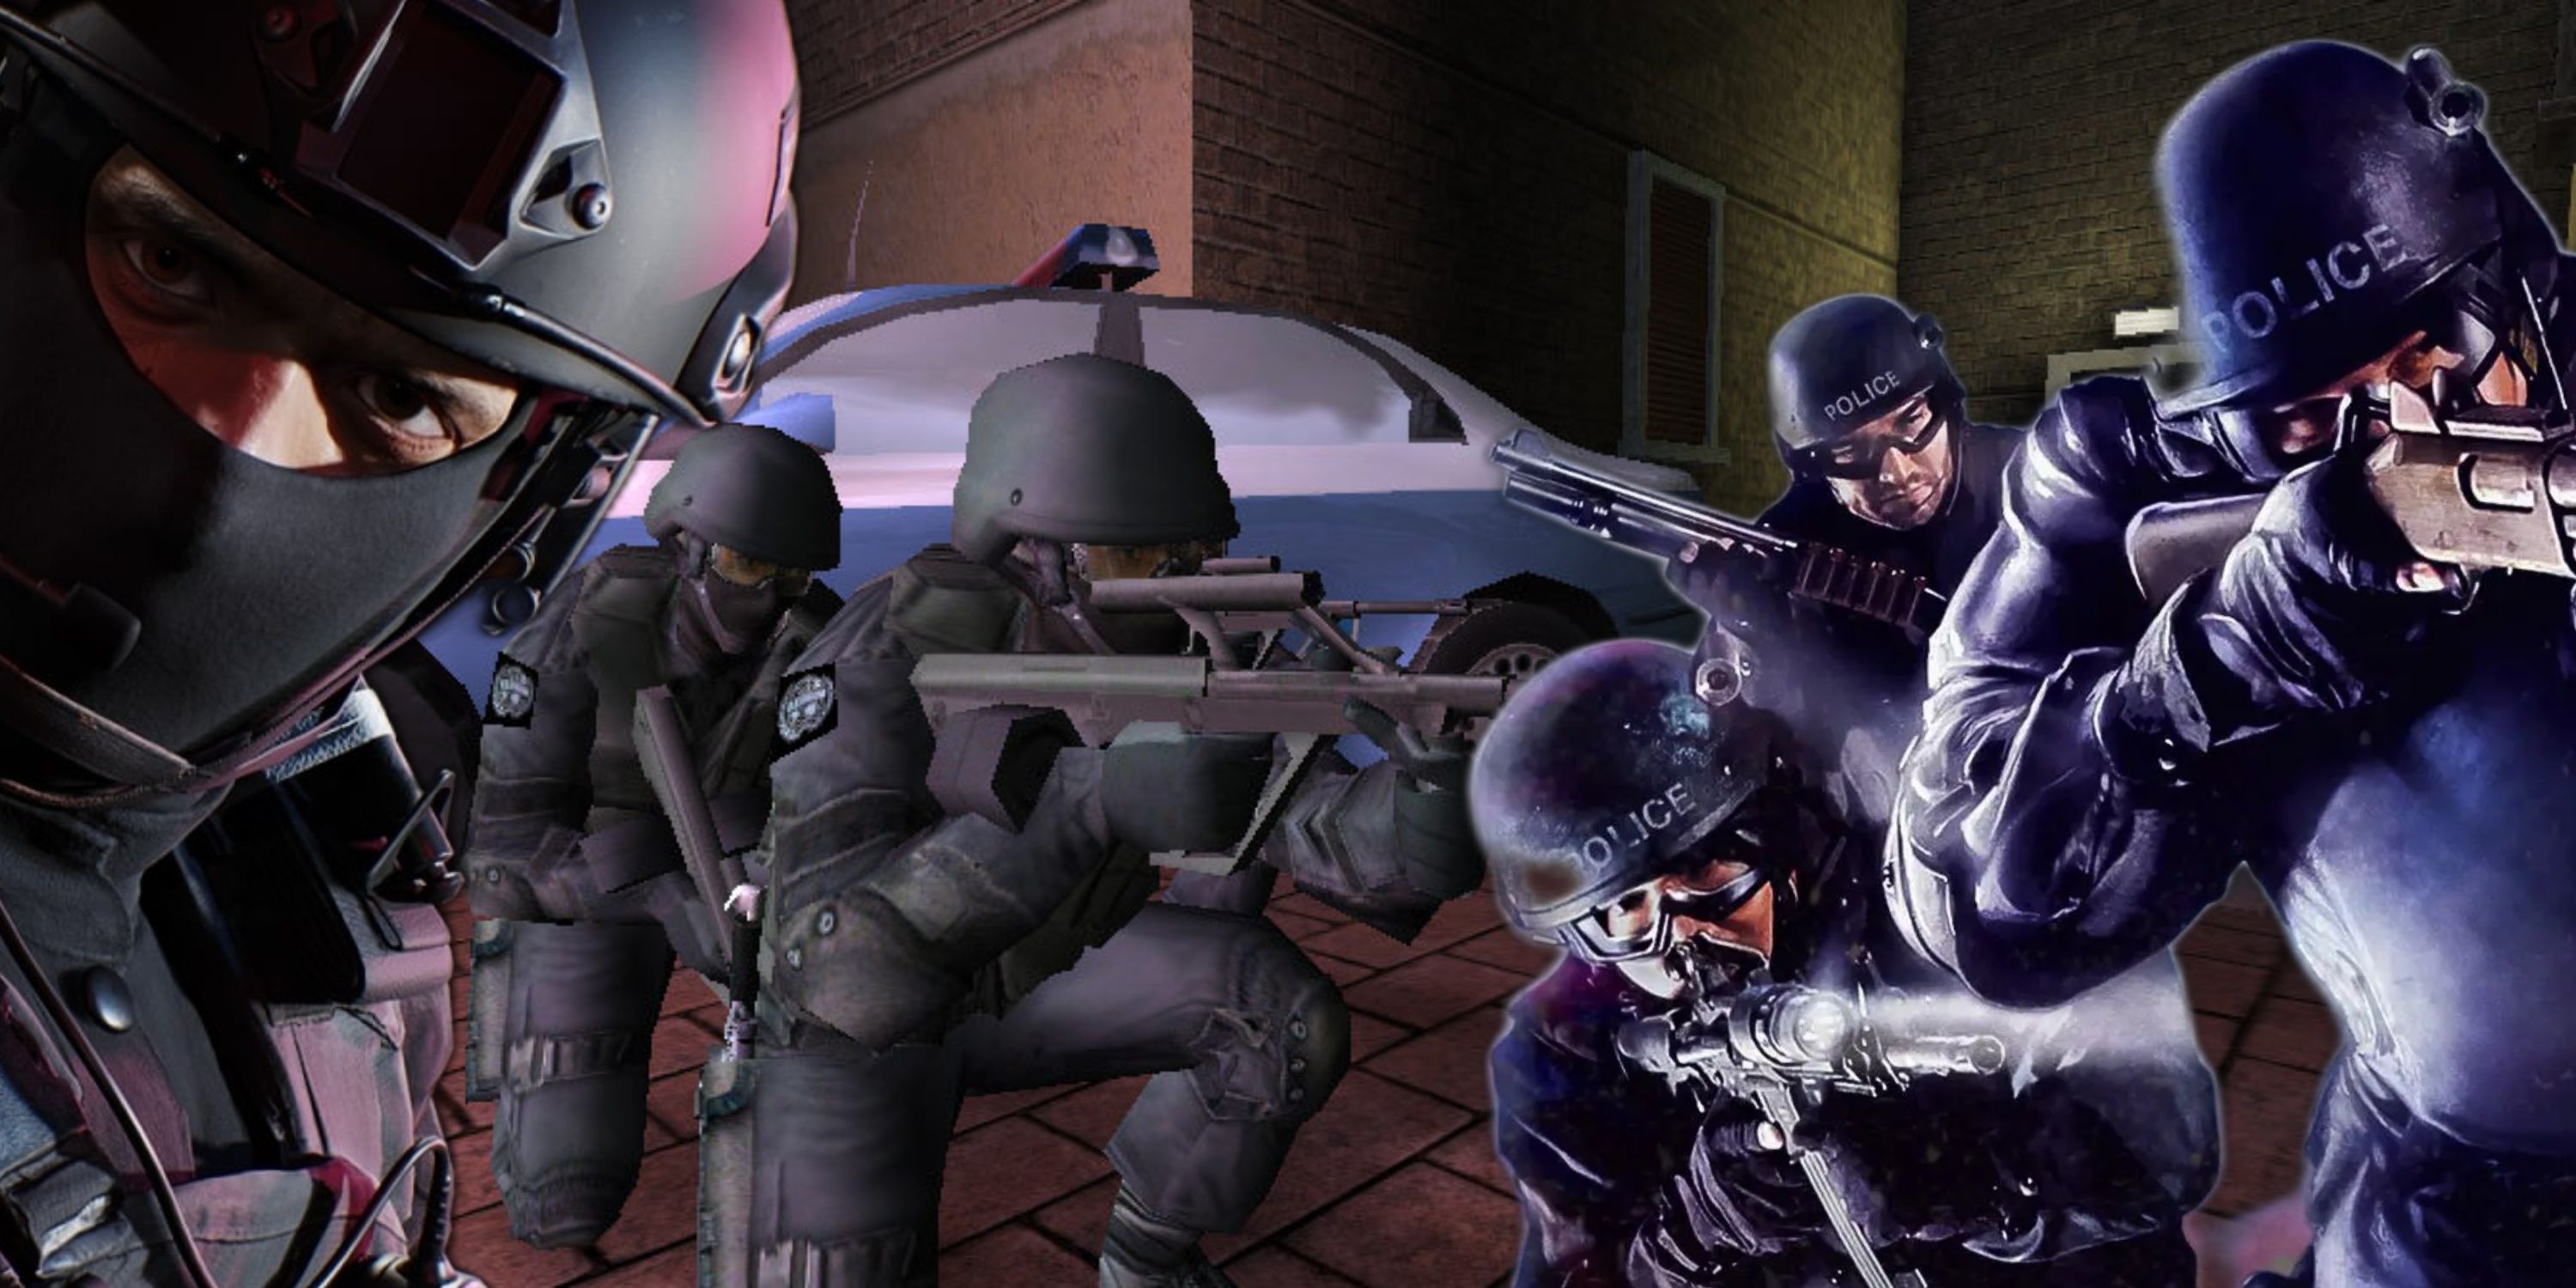 Best SWAT Games (Featured Image) - Ready Or Not + Rainbow Six 3 + SWAT 4